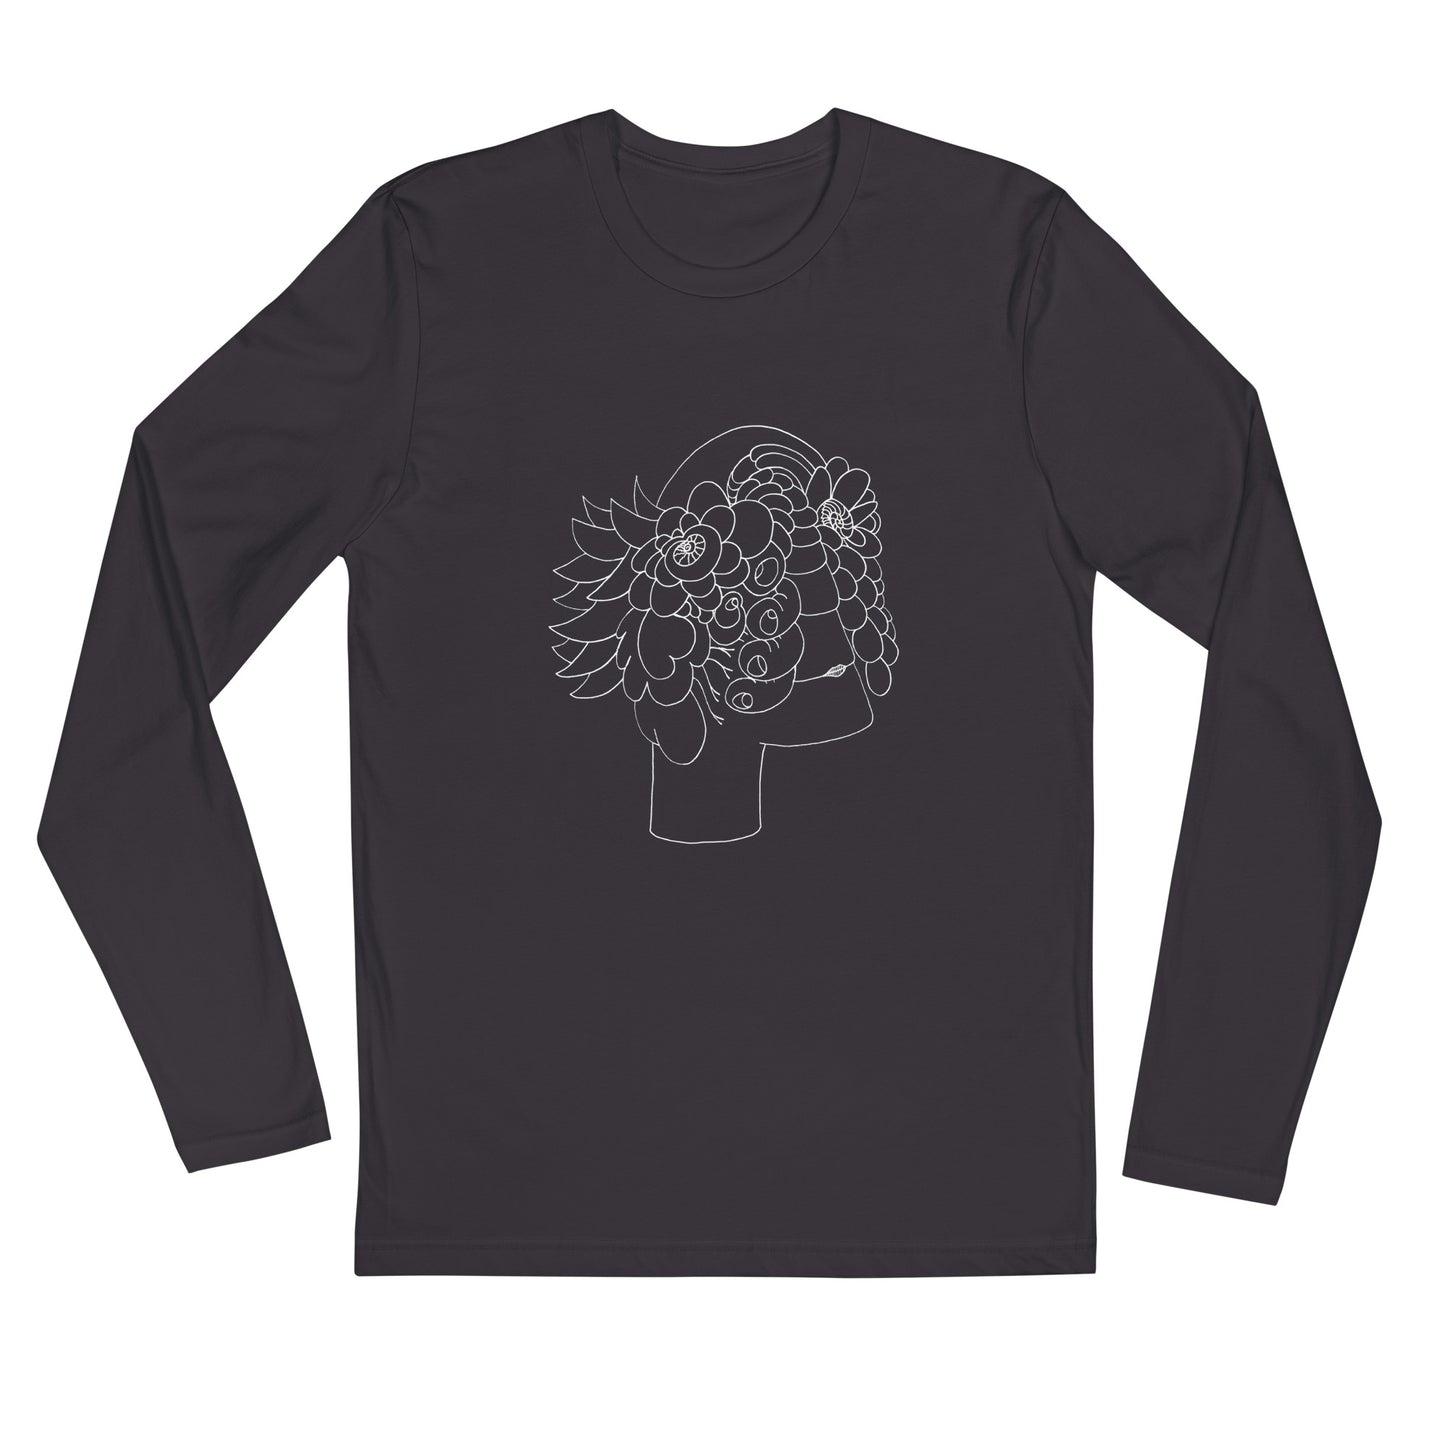 "Eye Beholden" Long Sleeve Fitted Crew